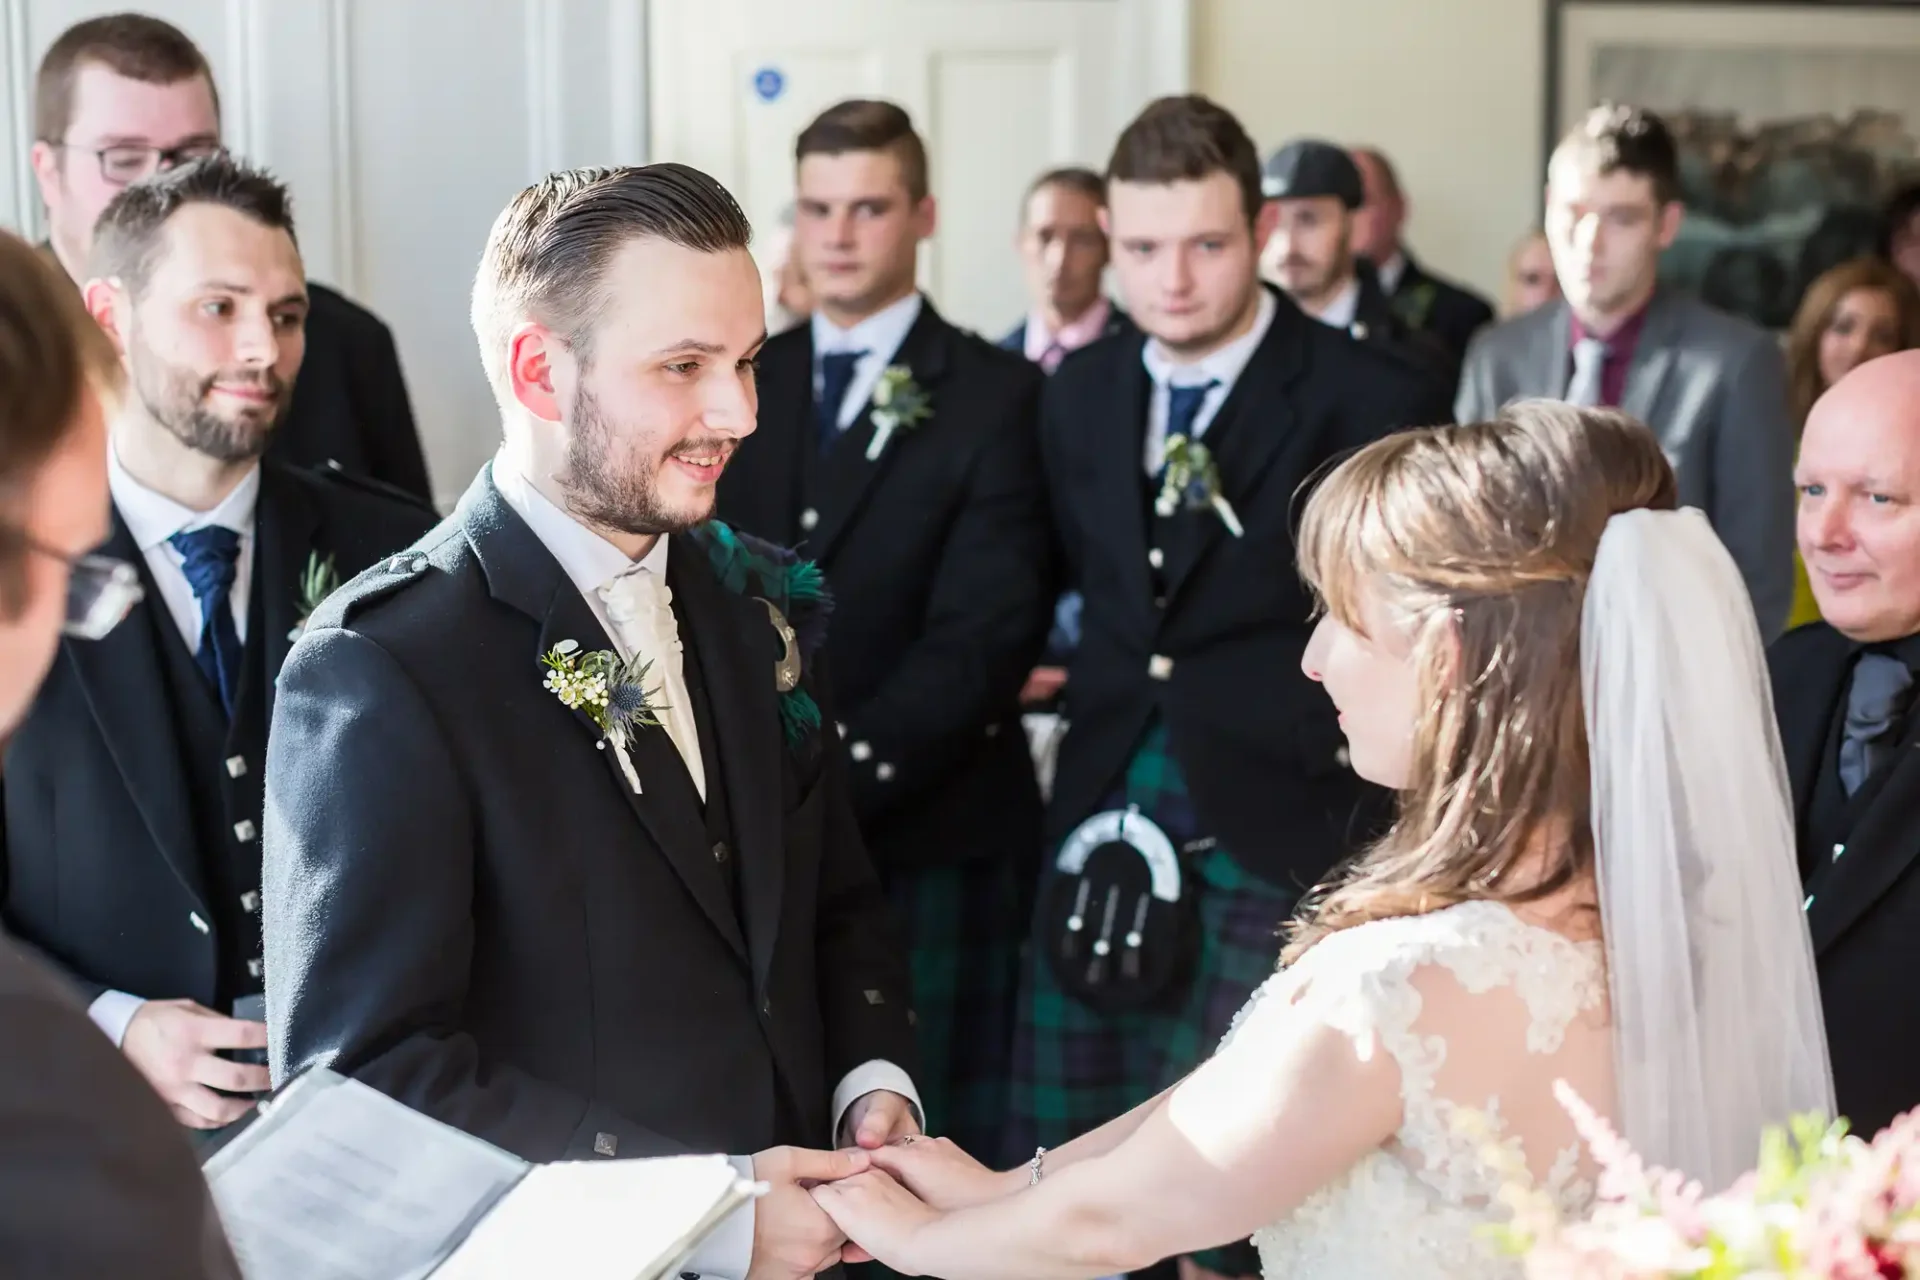 Bride and groom holding hands at their wedding ceremony, surrounded by guests, with one groomsmen wearing a kilt.